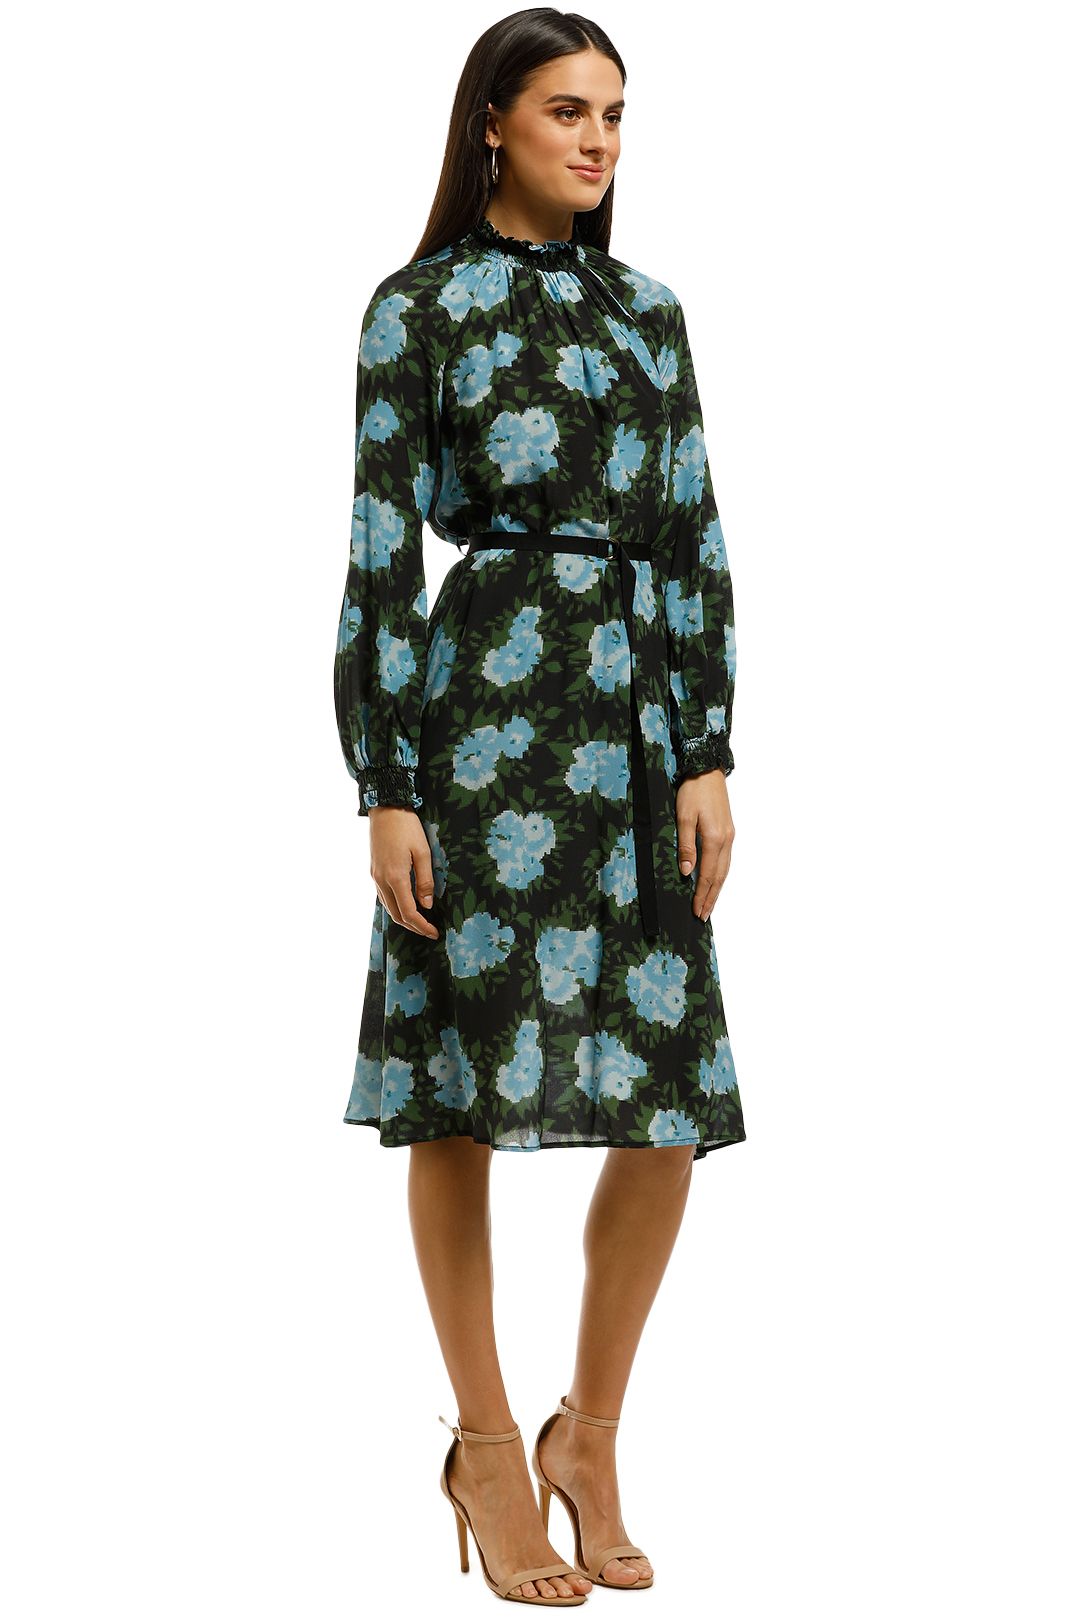 Rosalee Dress in Blue by Kate Sylvester for Rent